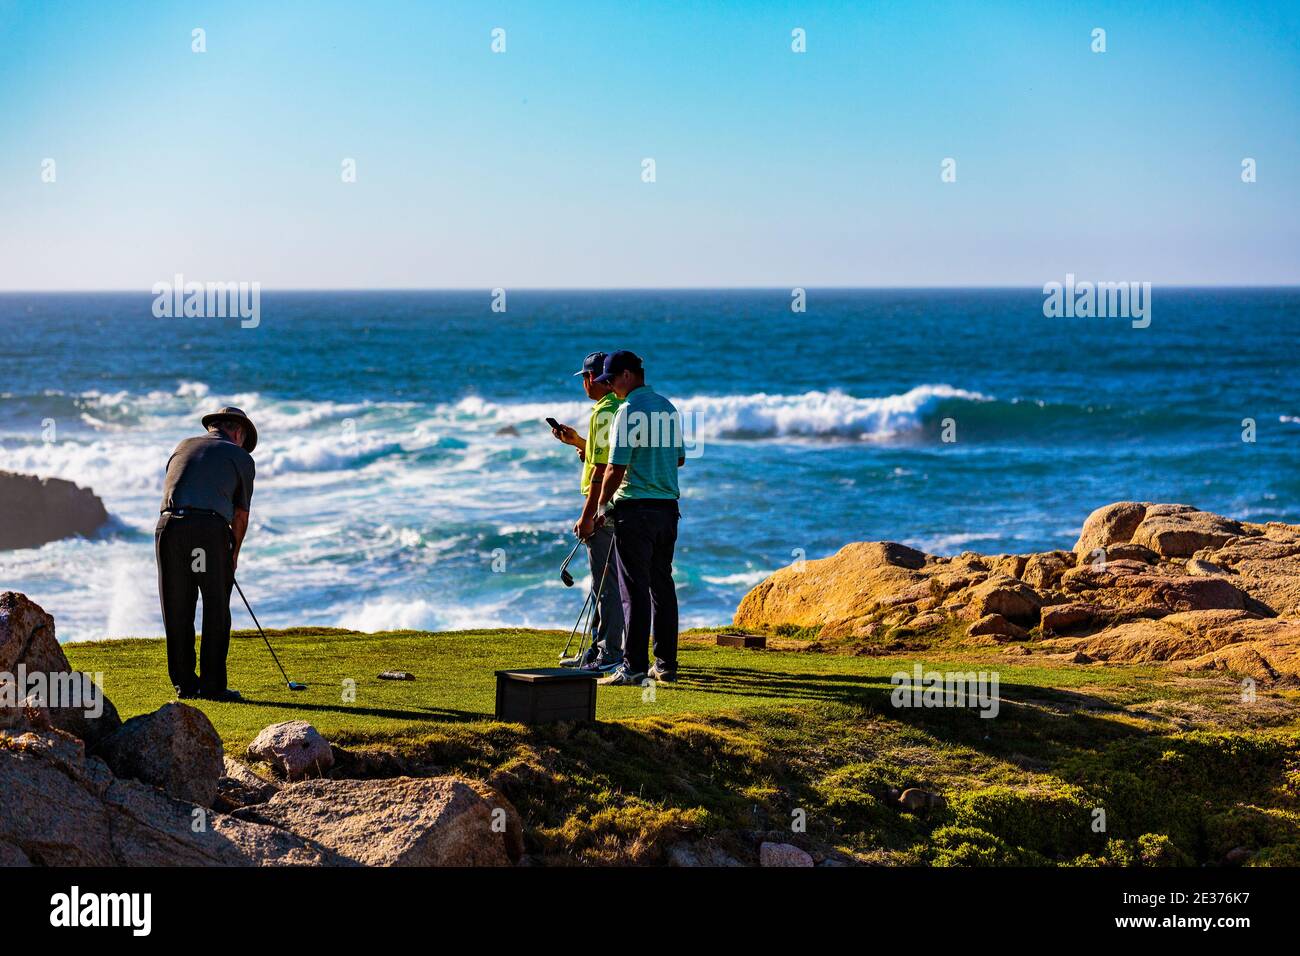 Point Joe,  Del Monte Forest, California, February 17, 2018: Golf course views of seaside links of the Monterey Peninsula Country Club, located on the Stock Photo